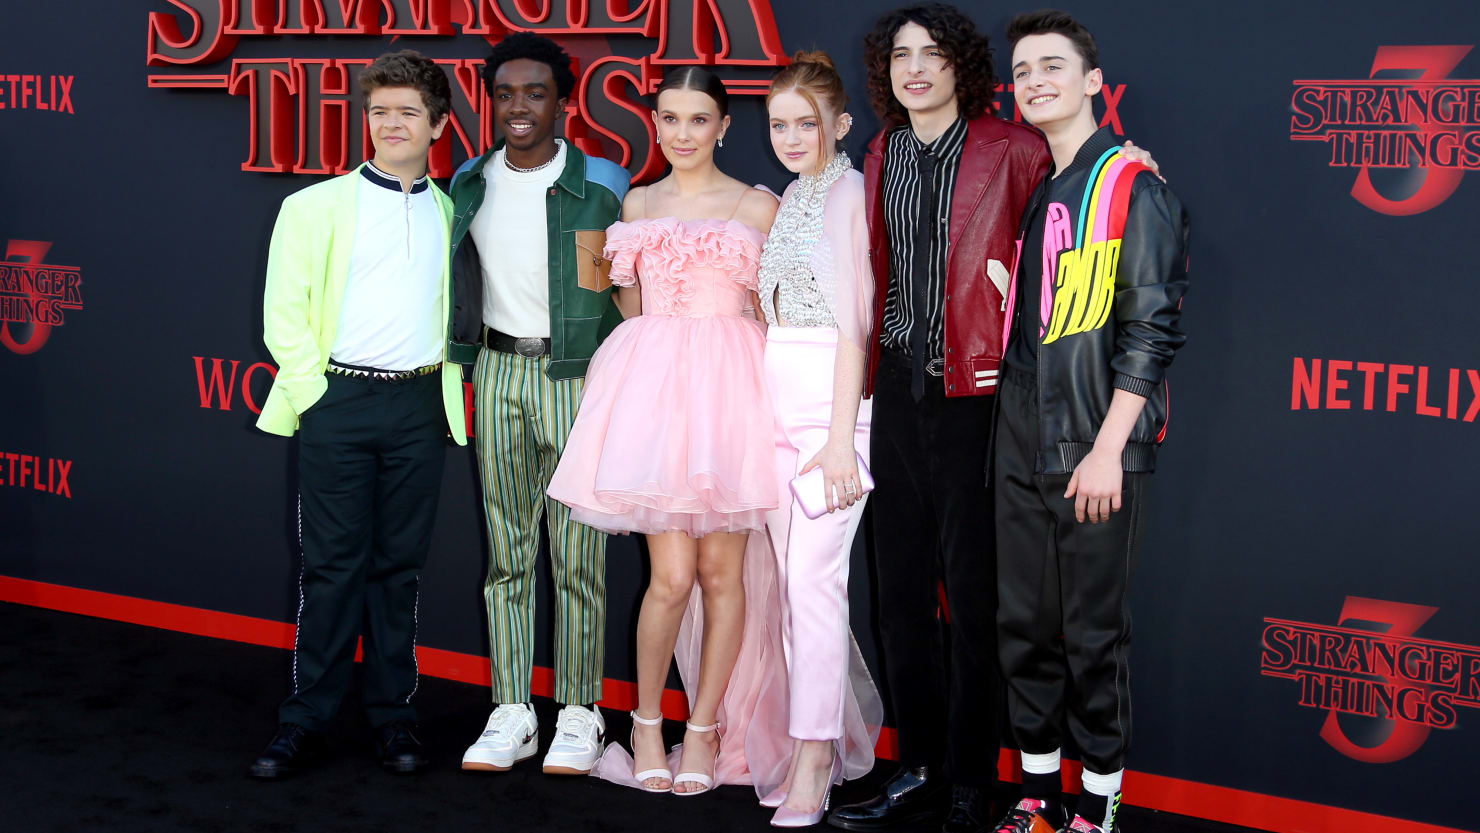 Stranger Things Star Caleb McLaughlin Speaks Out on Racist Fans at Comic Con